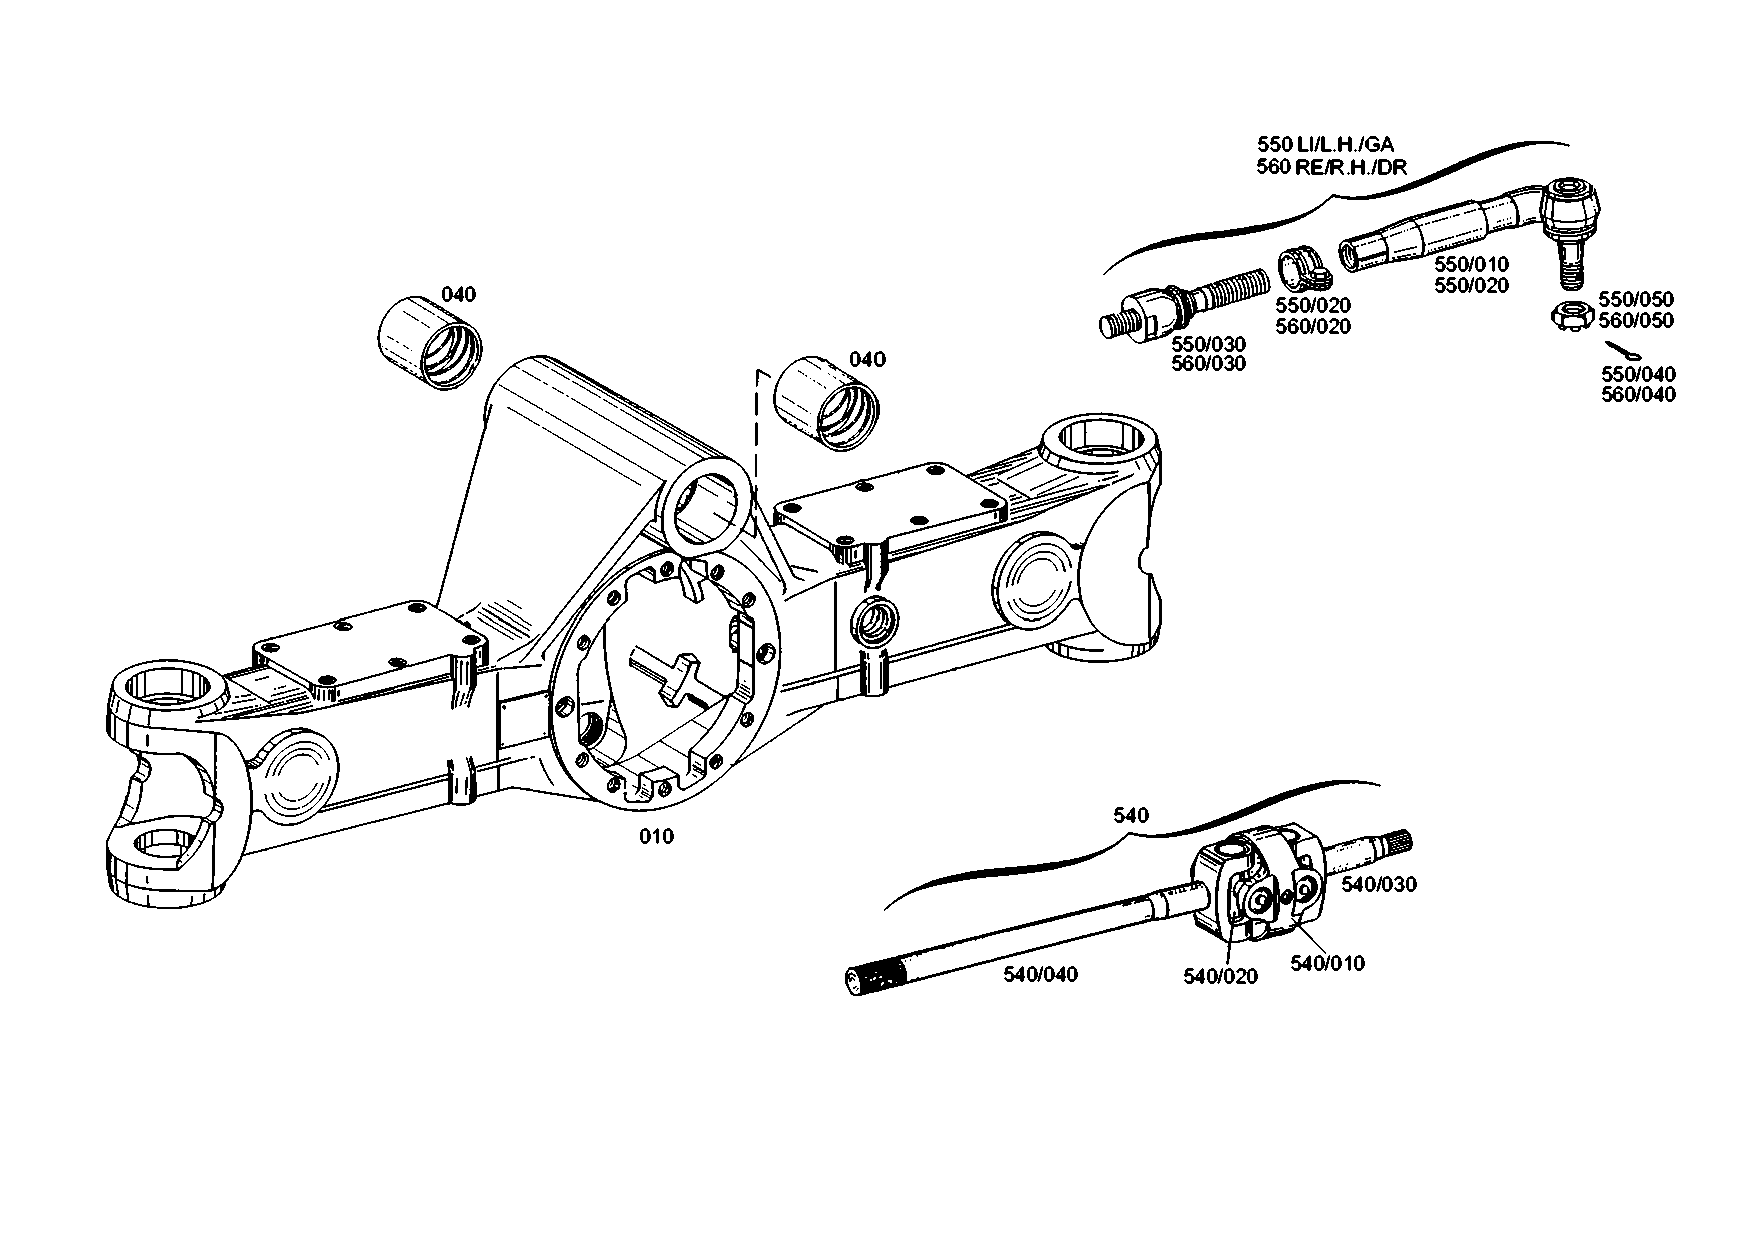 drawing for LIEBHERR GMBH 10216559 - TIE ROD (figure 5)